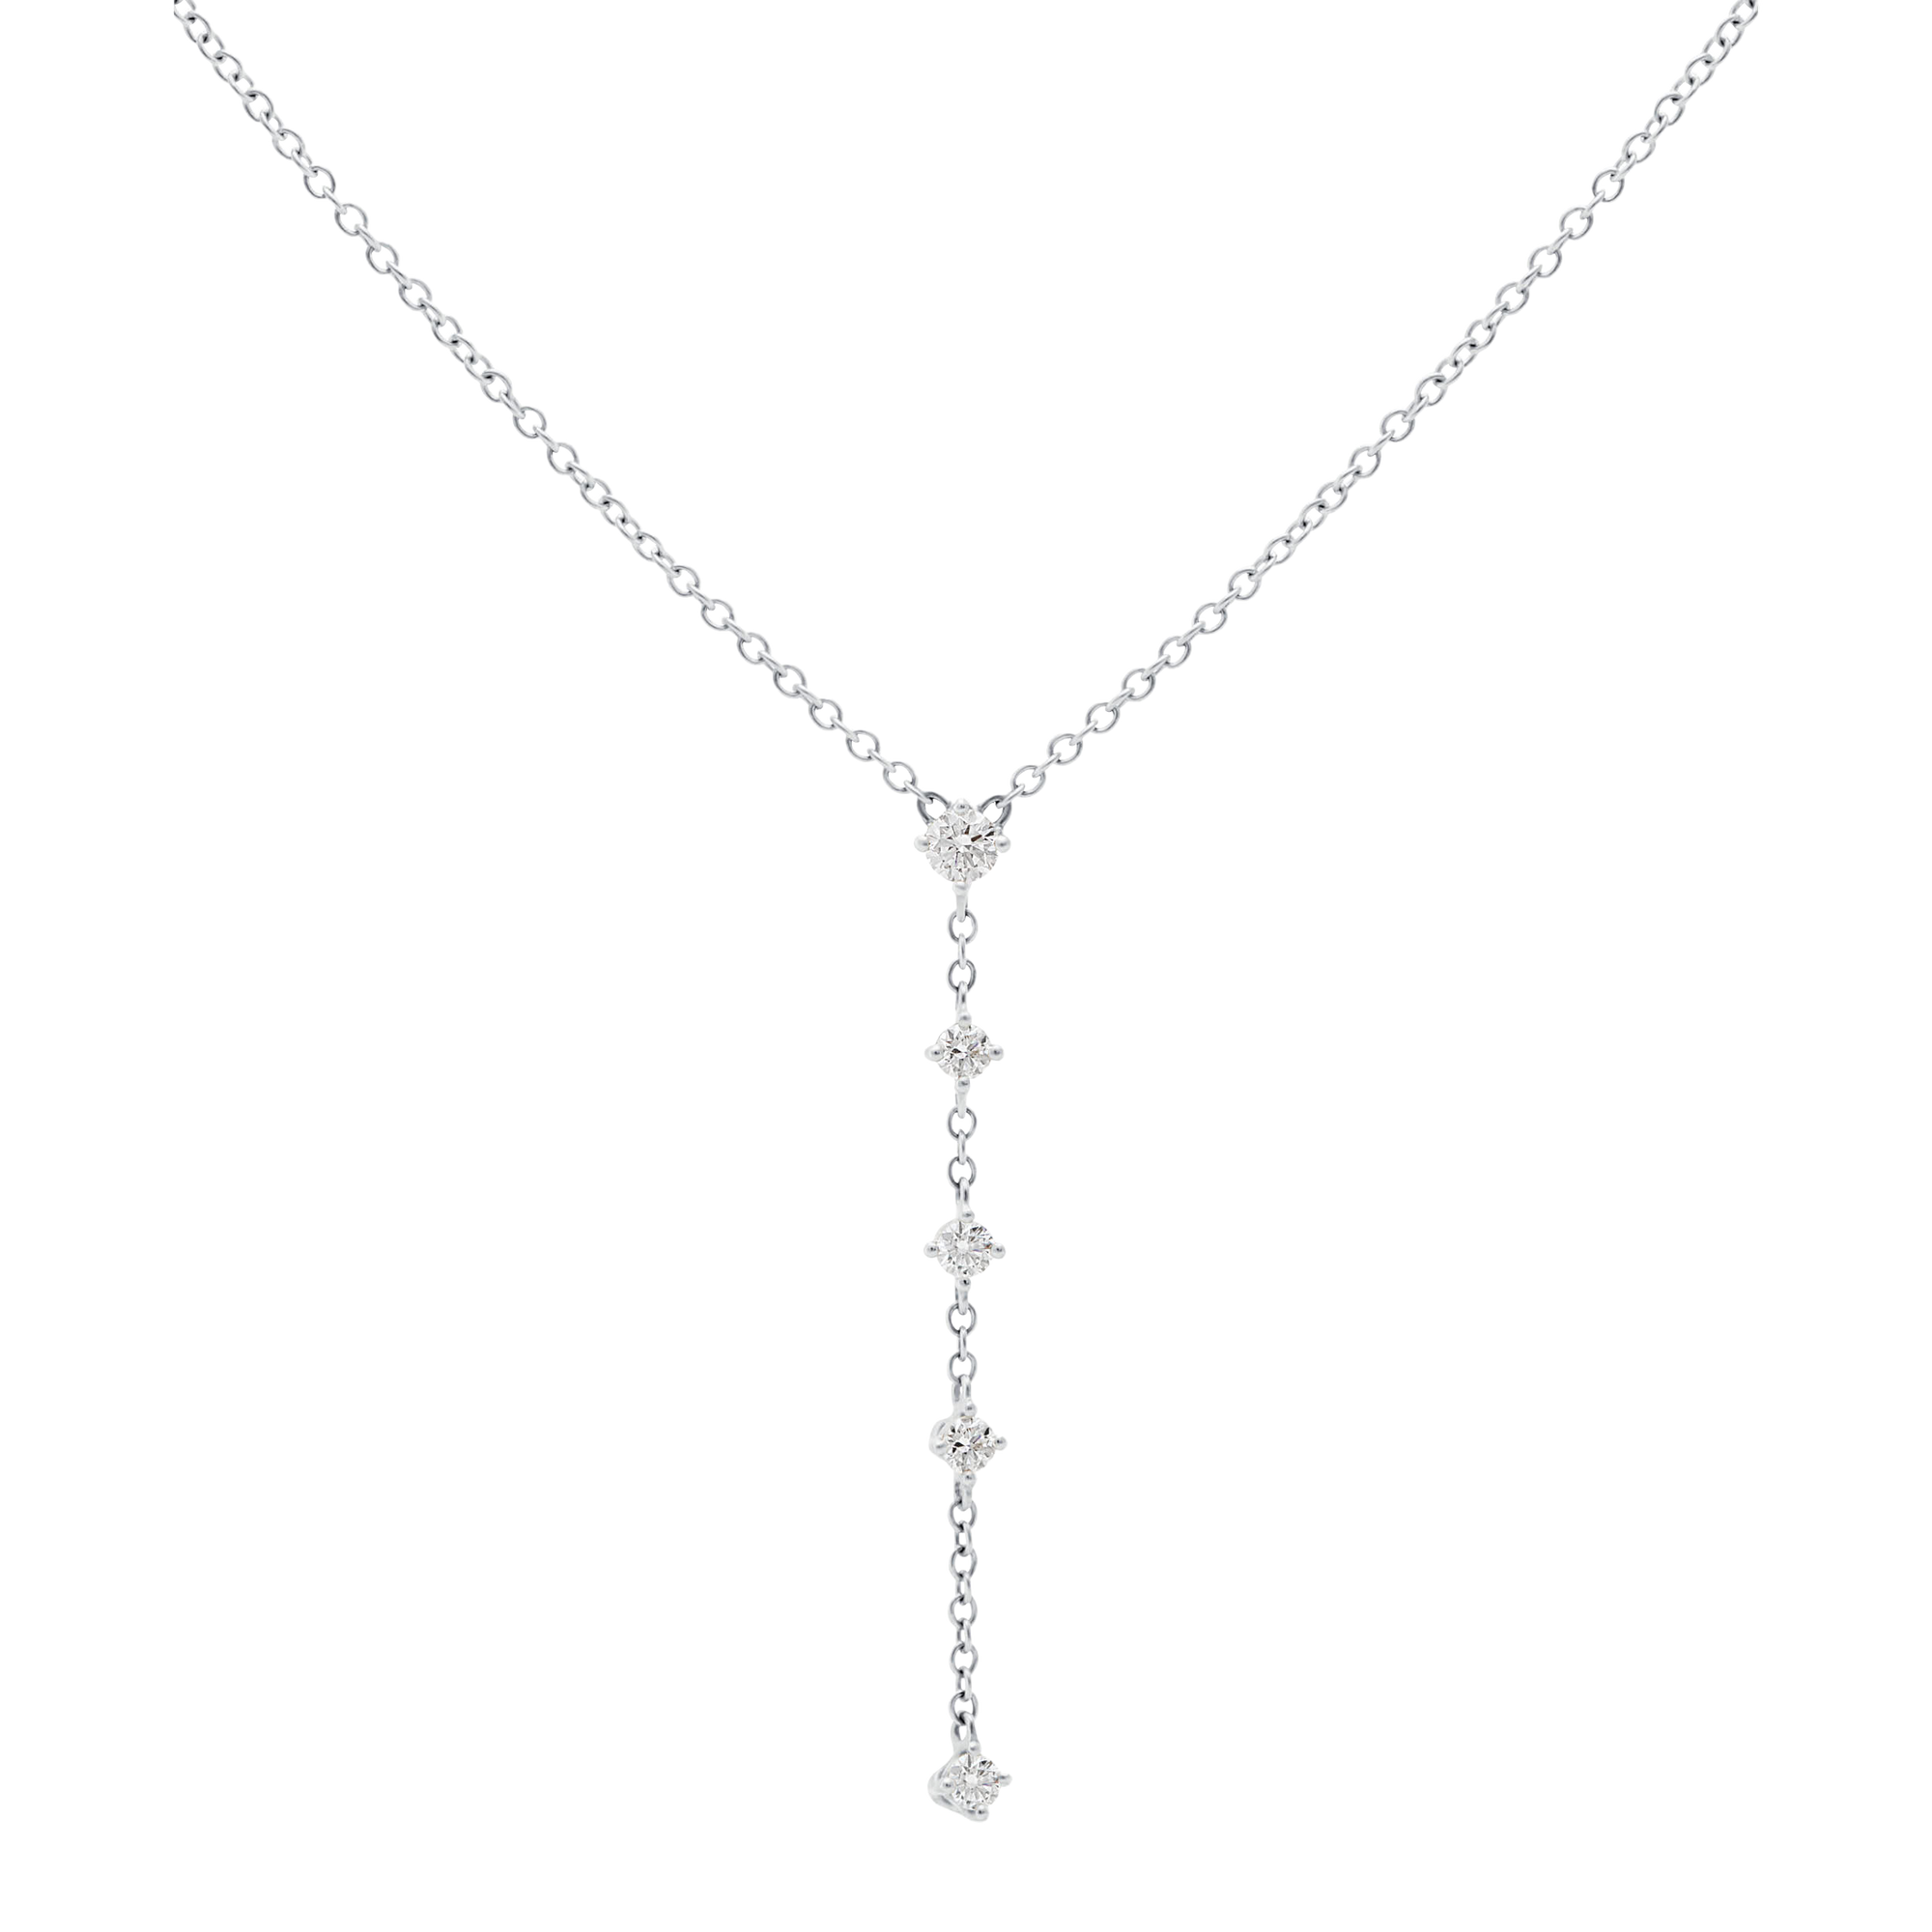 
					Zany_Shy_Arielle-Necklace_White-Gold_Lab-Grown-Diamond_2500x_0ad6a702-33c8-4200-a8d5-217c99d0f1f2.png